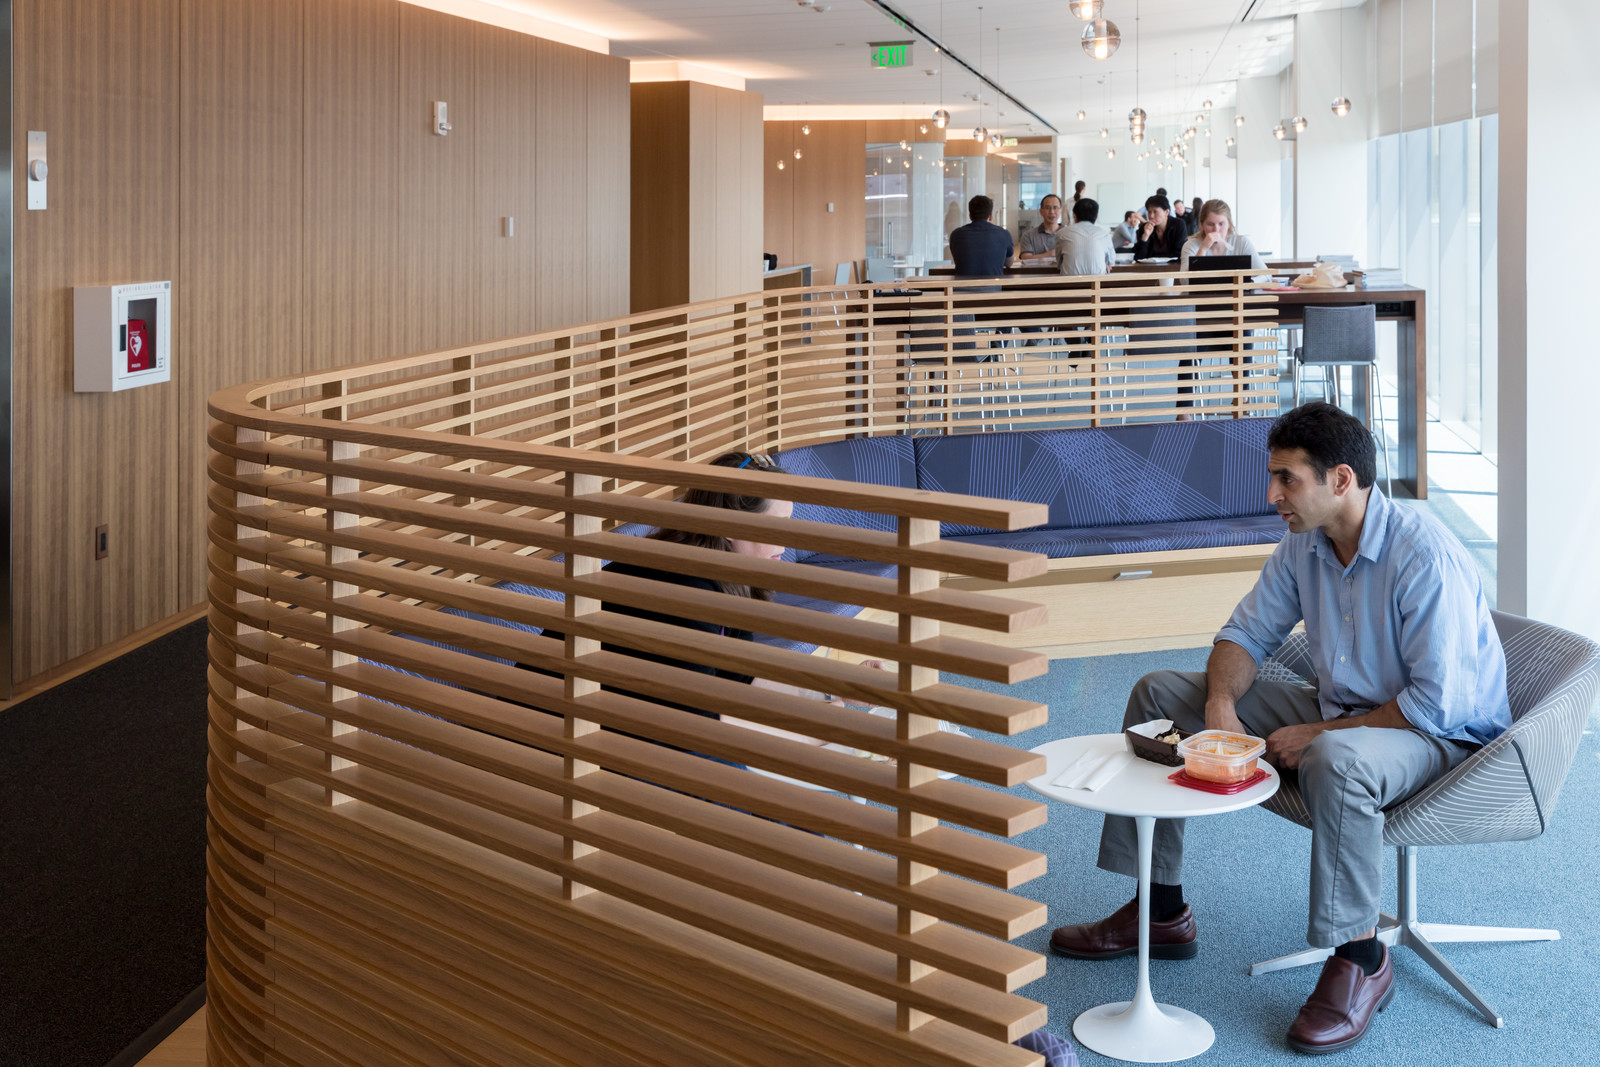 These custom built breakout spaces are an part of the Novartis campus. These spaces were created to be warm and inviting collaborative spaces. 